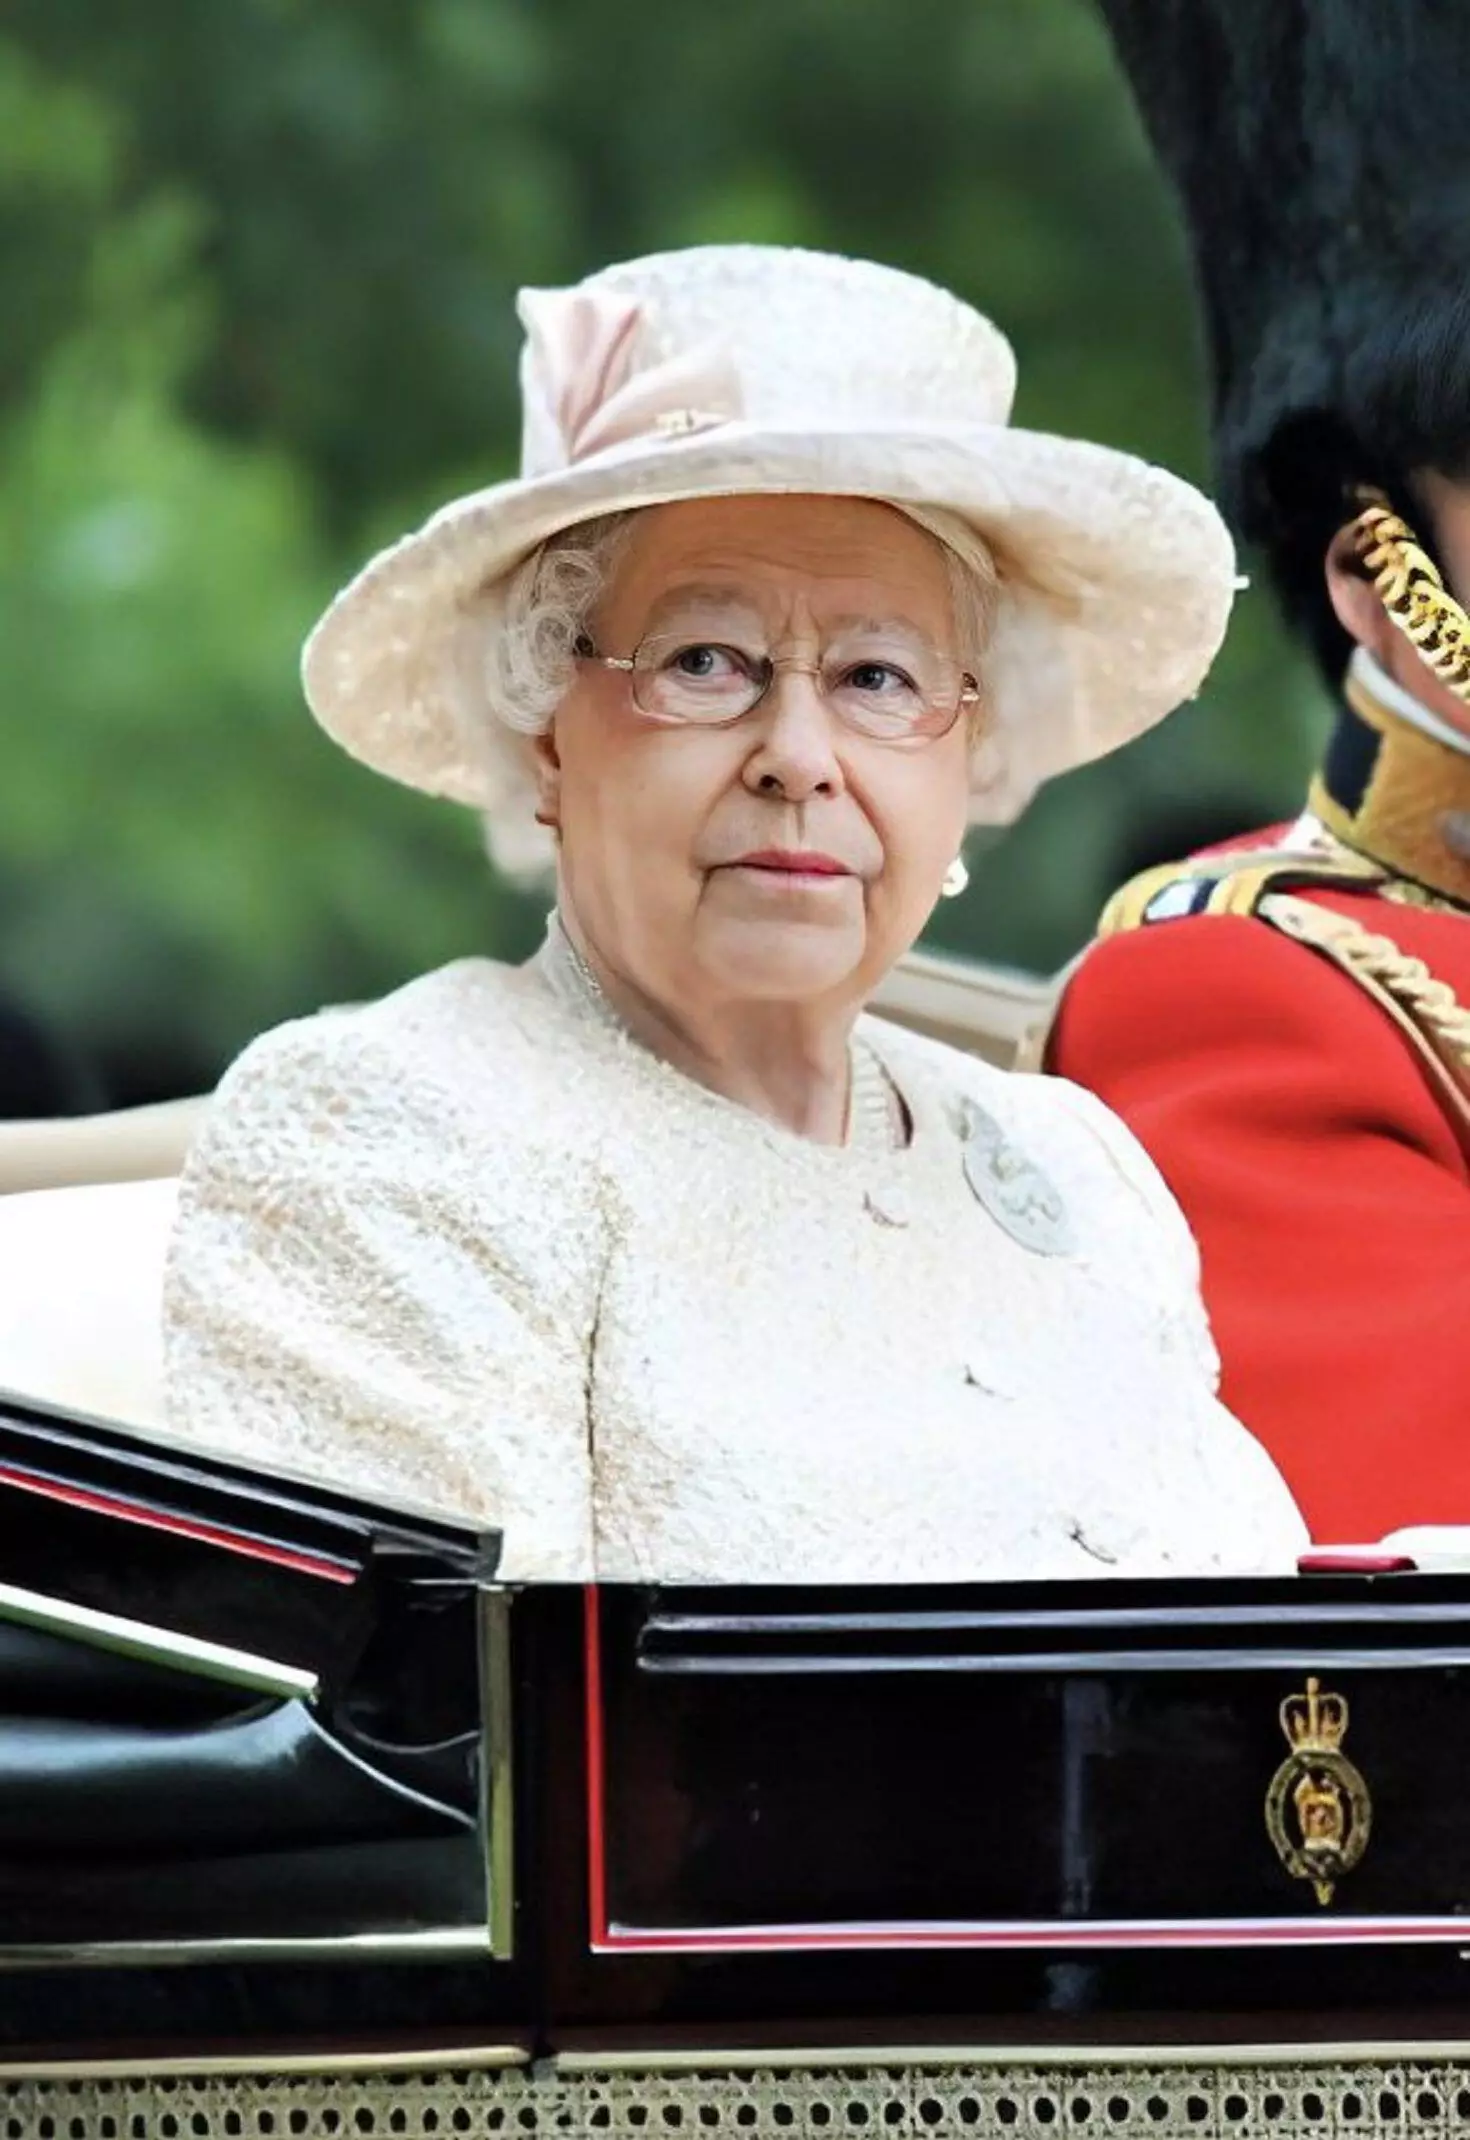 This year marks the Queen's platinum jubilee (